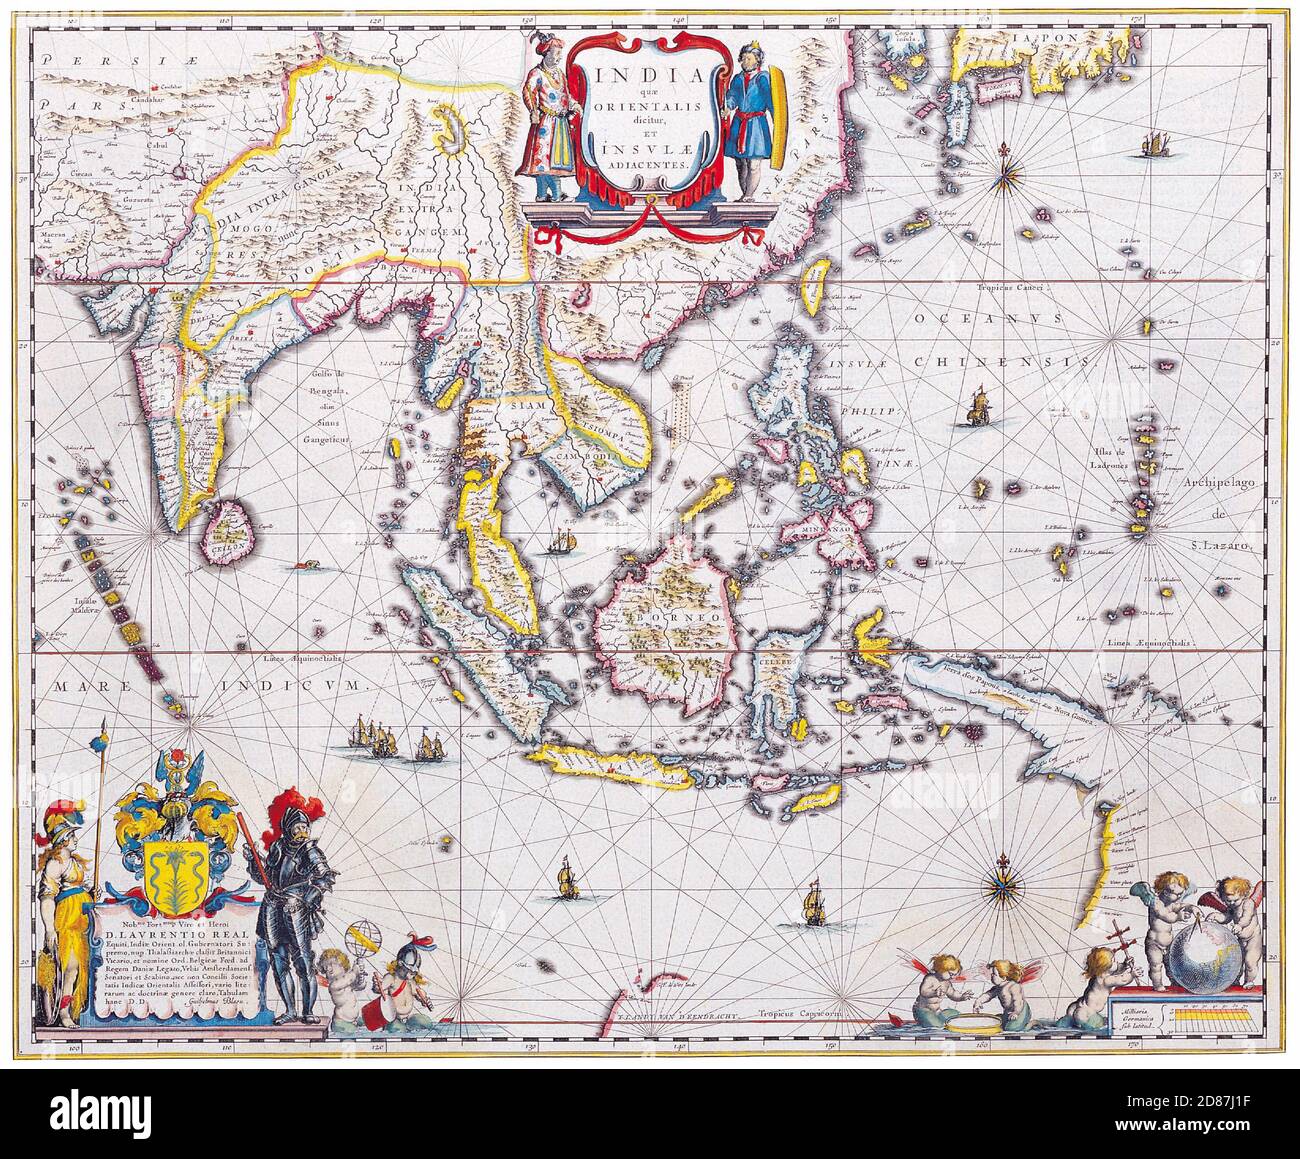 Antique Maps of the World. Map of South East Asia Willem Blaeu. C 1650. Stock Photo